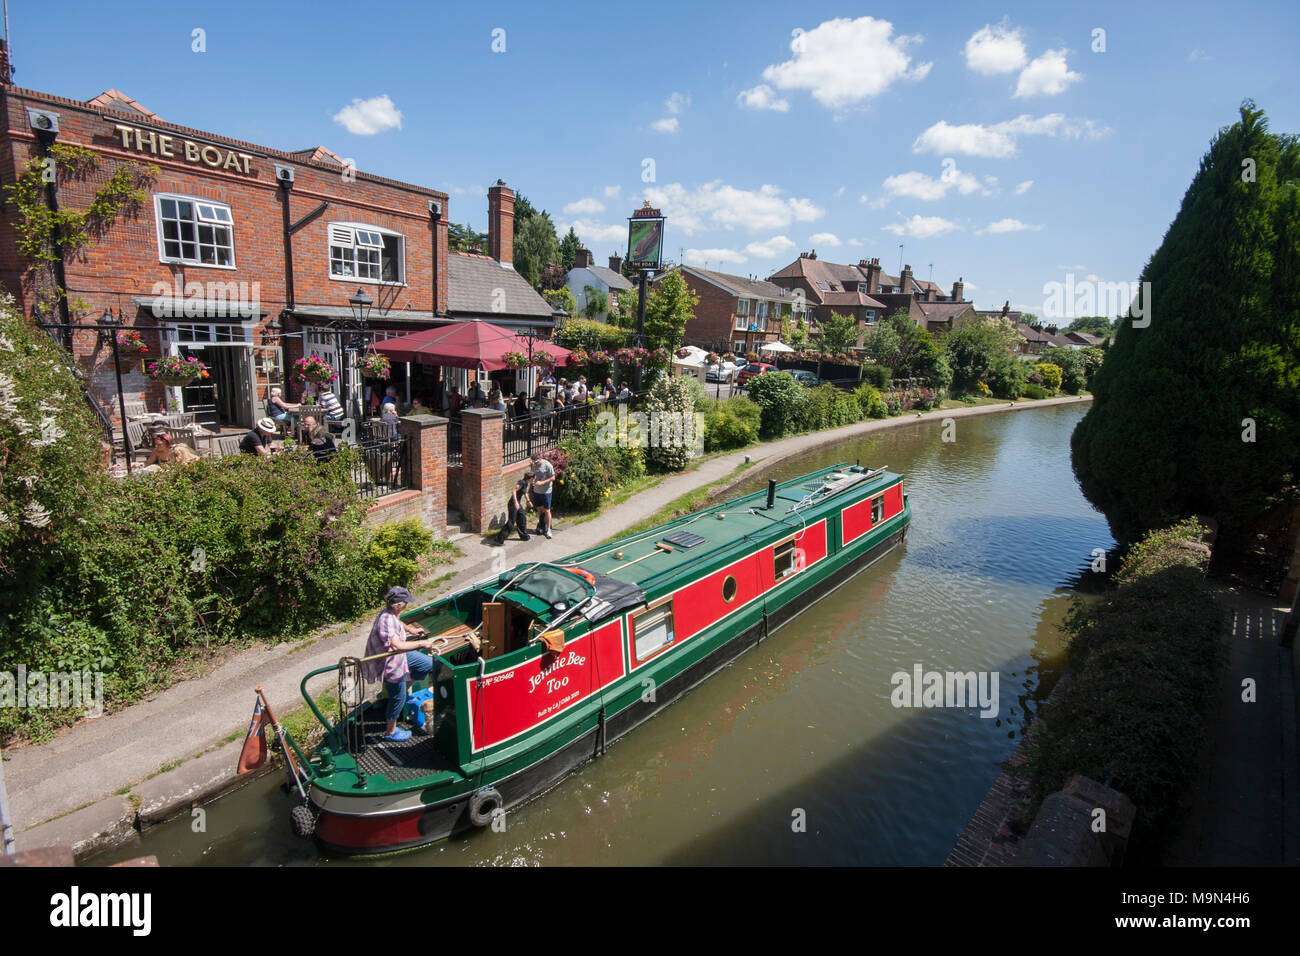 A canal boat on the Grand Union Canal in Berkhamsted Stock Photo